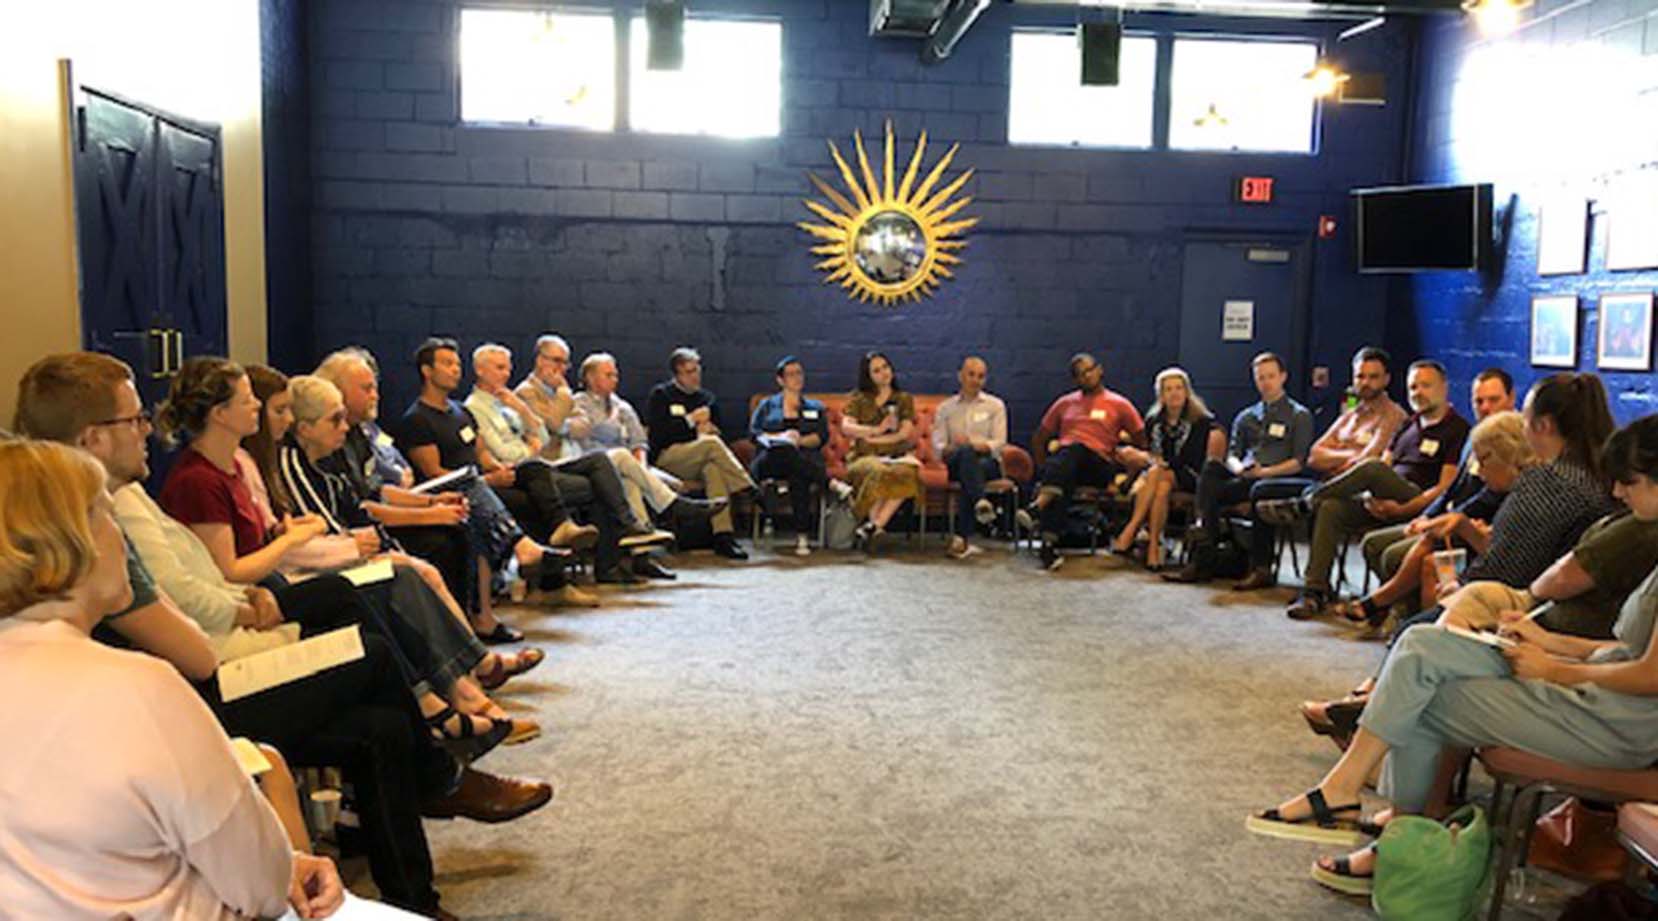 NAMT hosts intimate, informal events in conjunction with our member theatres' new work festivals or productions to explore issues around new musical production and development, often through a local lens.